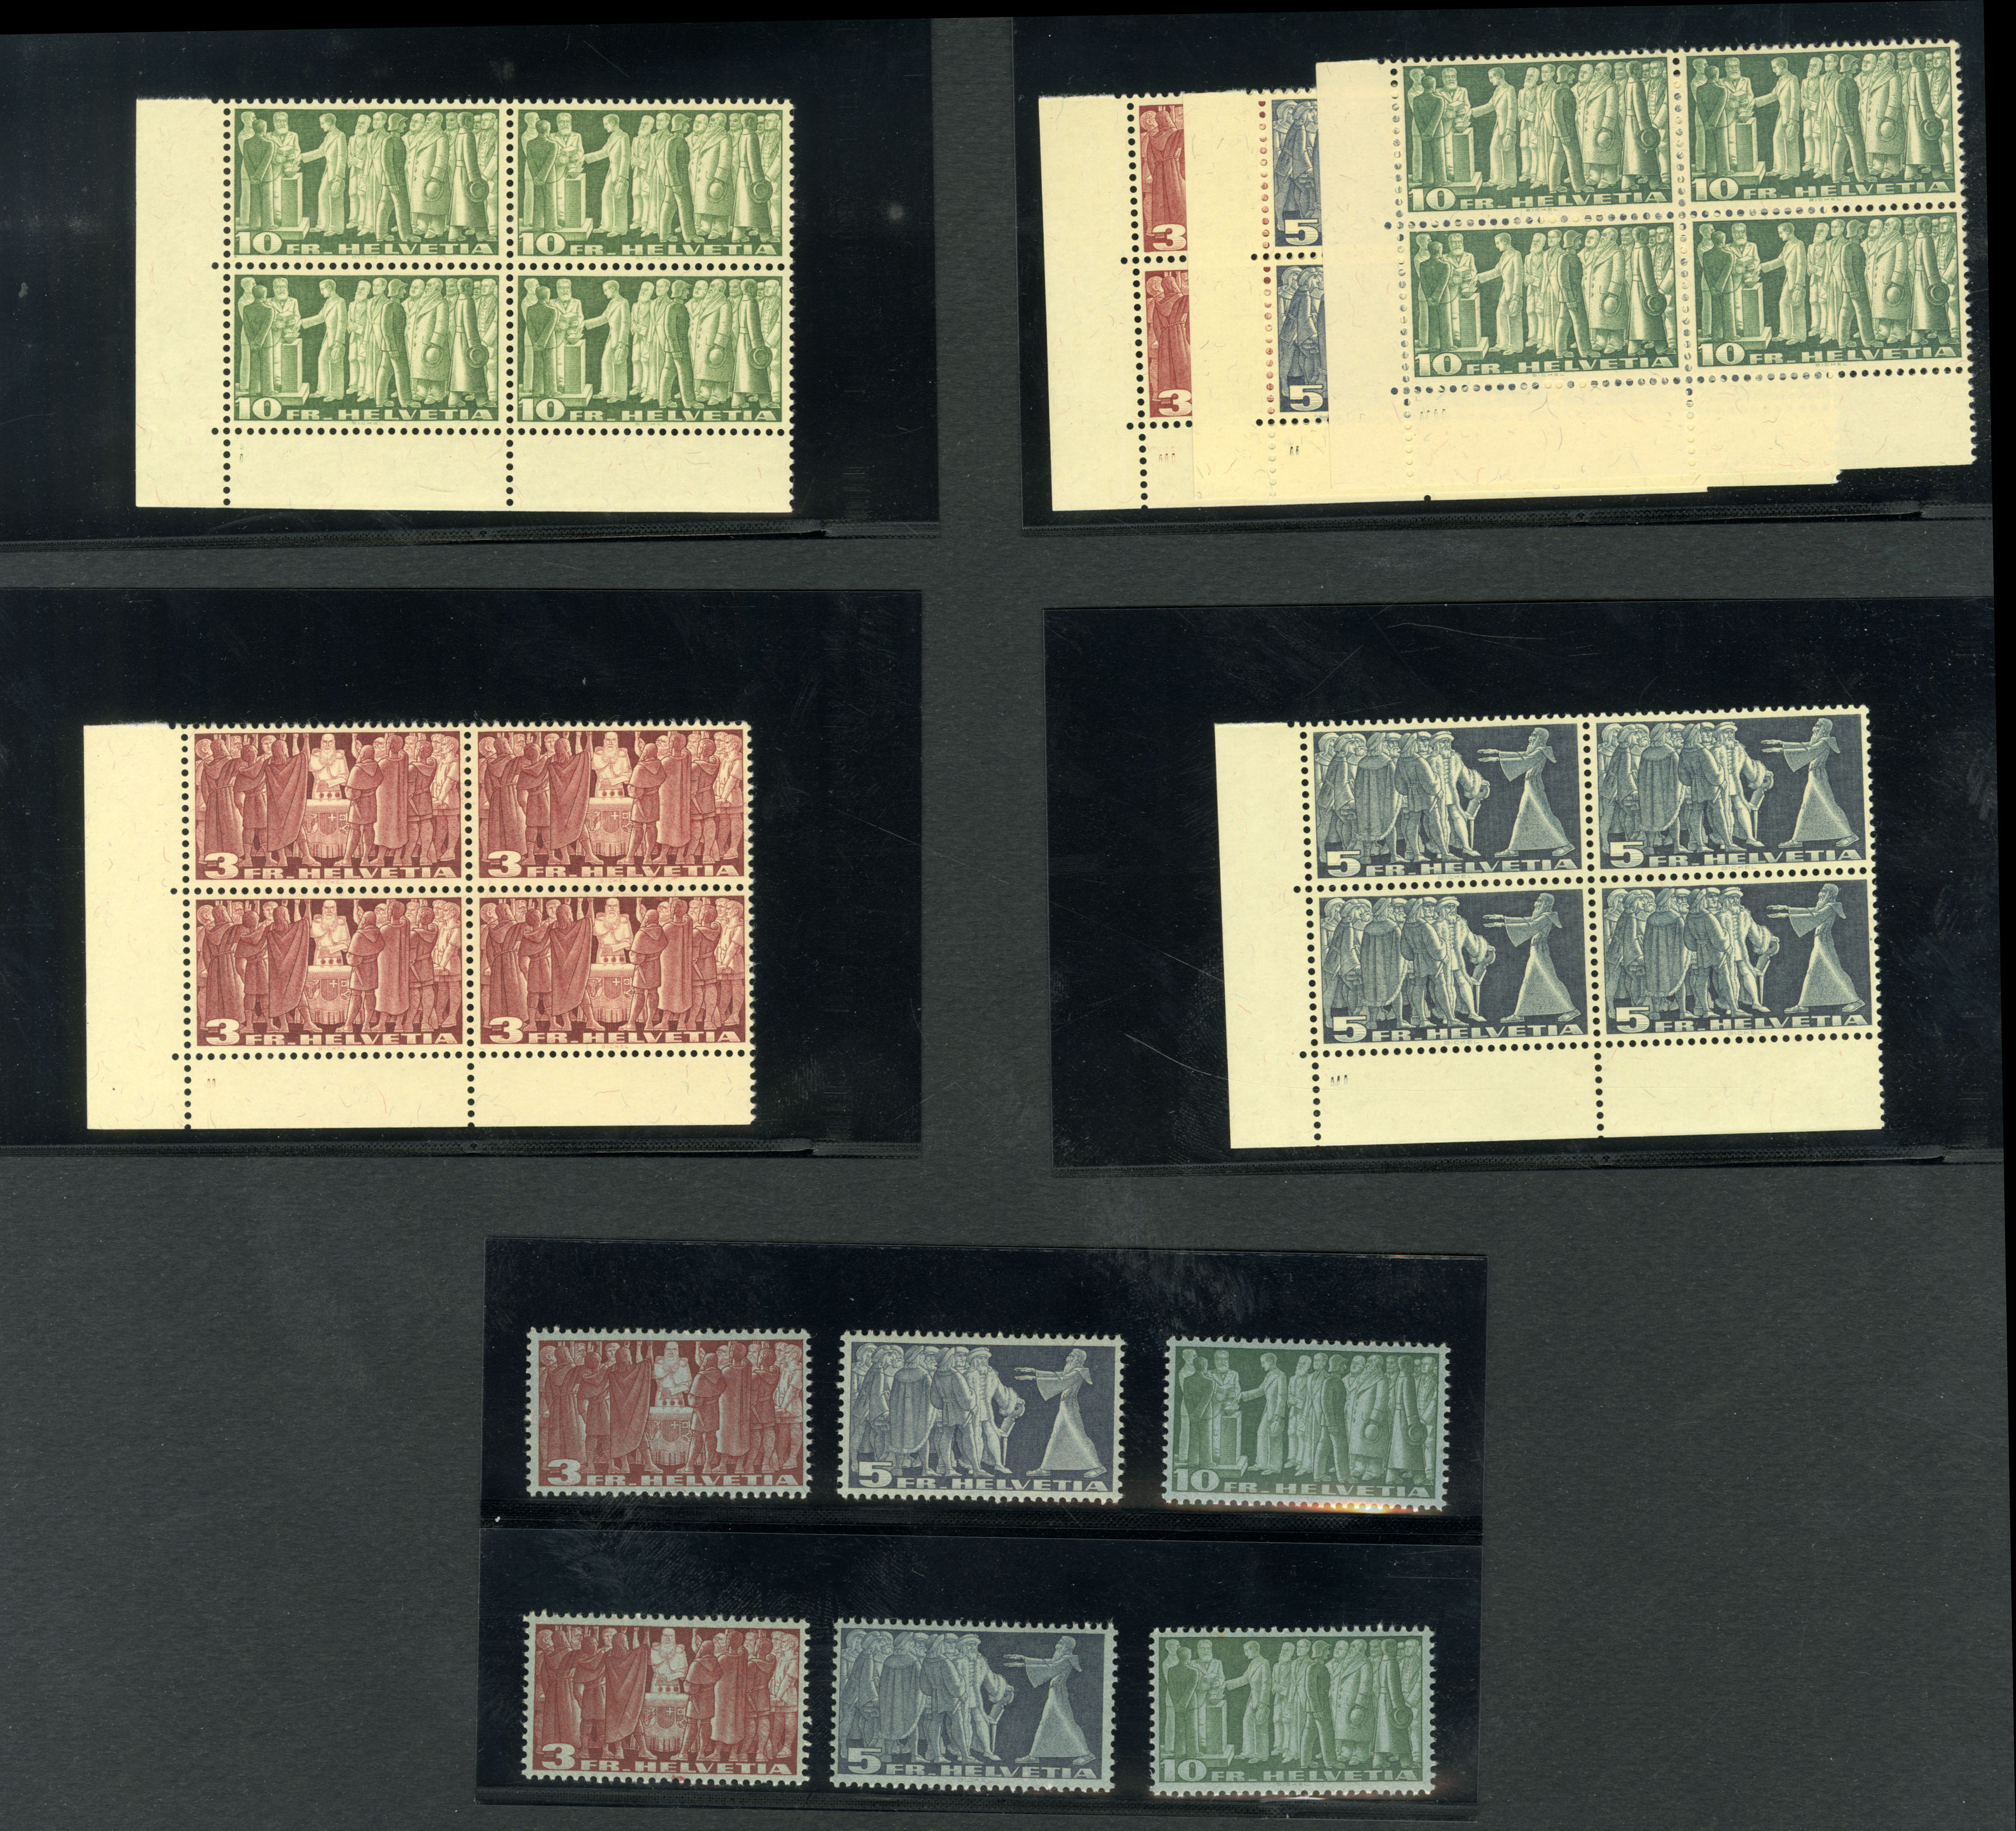 Lot 1311 - RUSSIA Russia Used in Asia  -  Cherrystone Auctions U.S. & Worldwide Stamps & Postal History